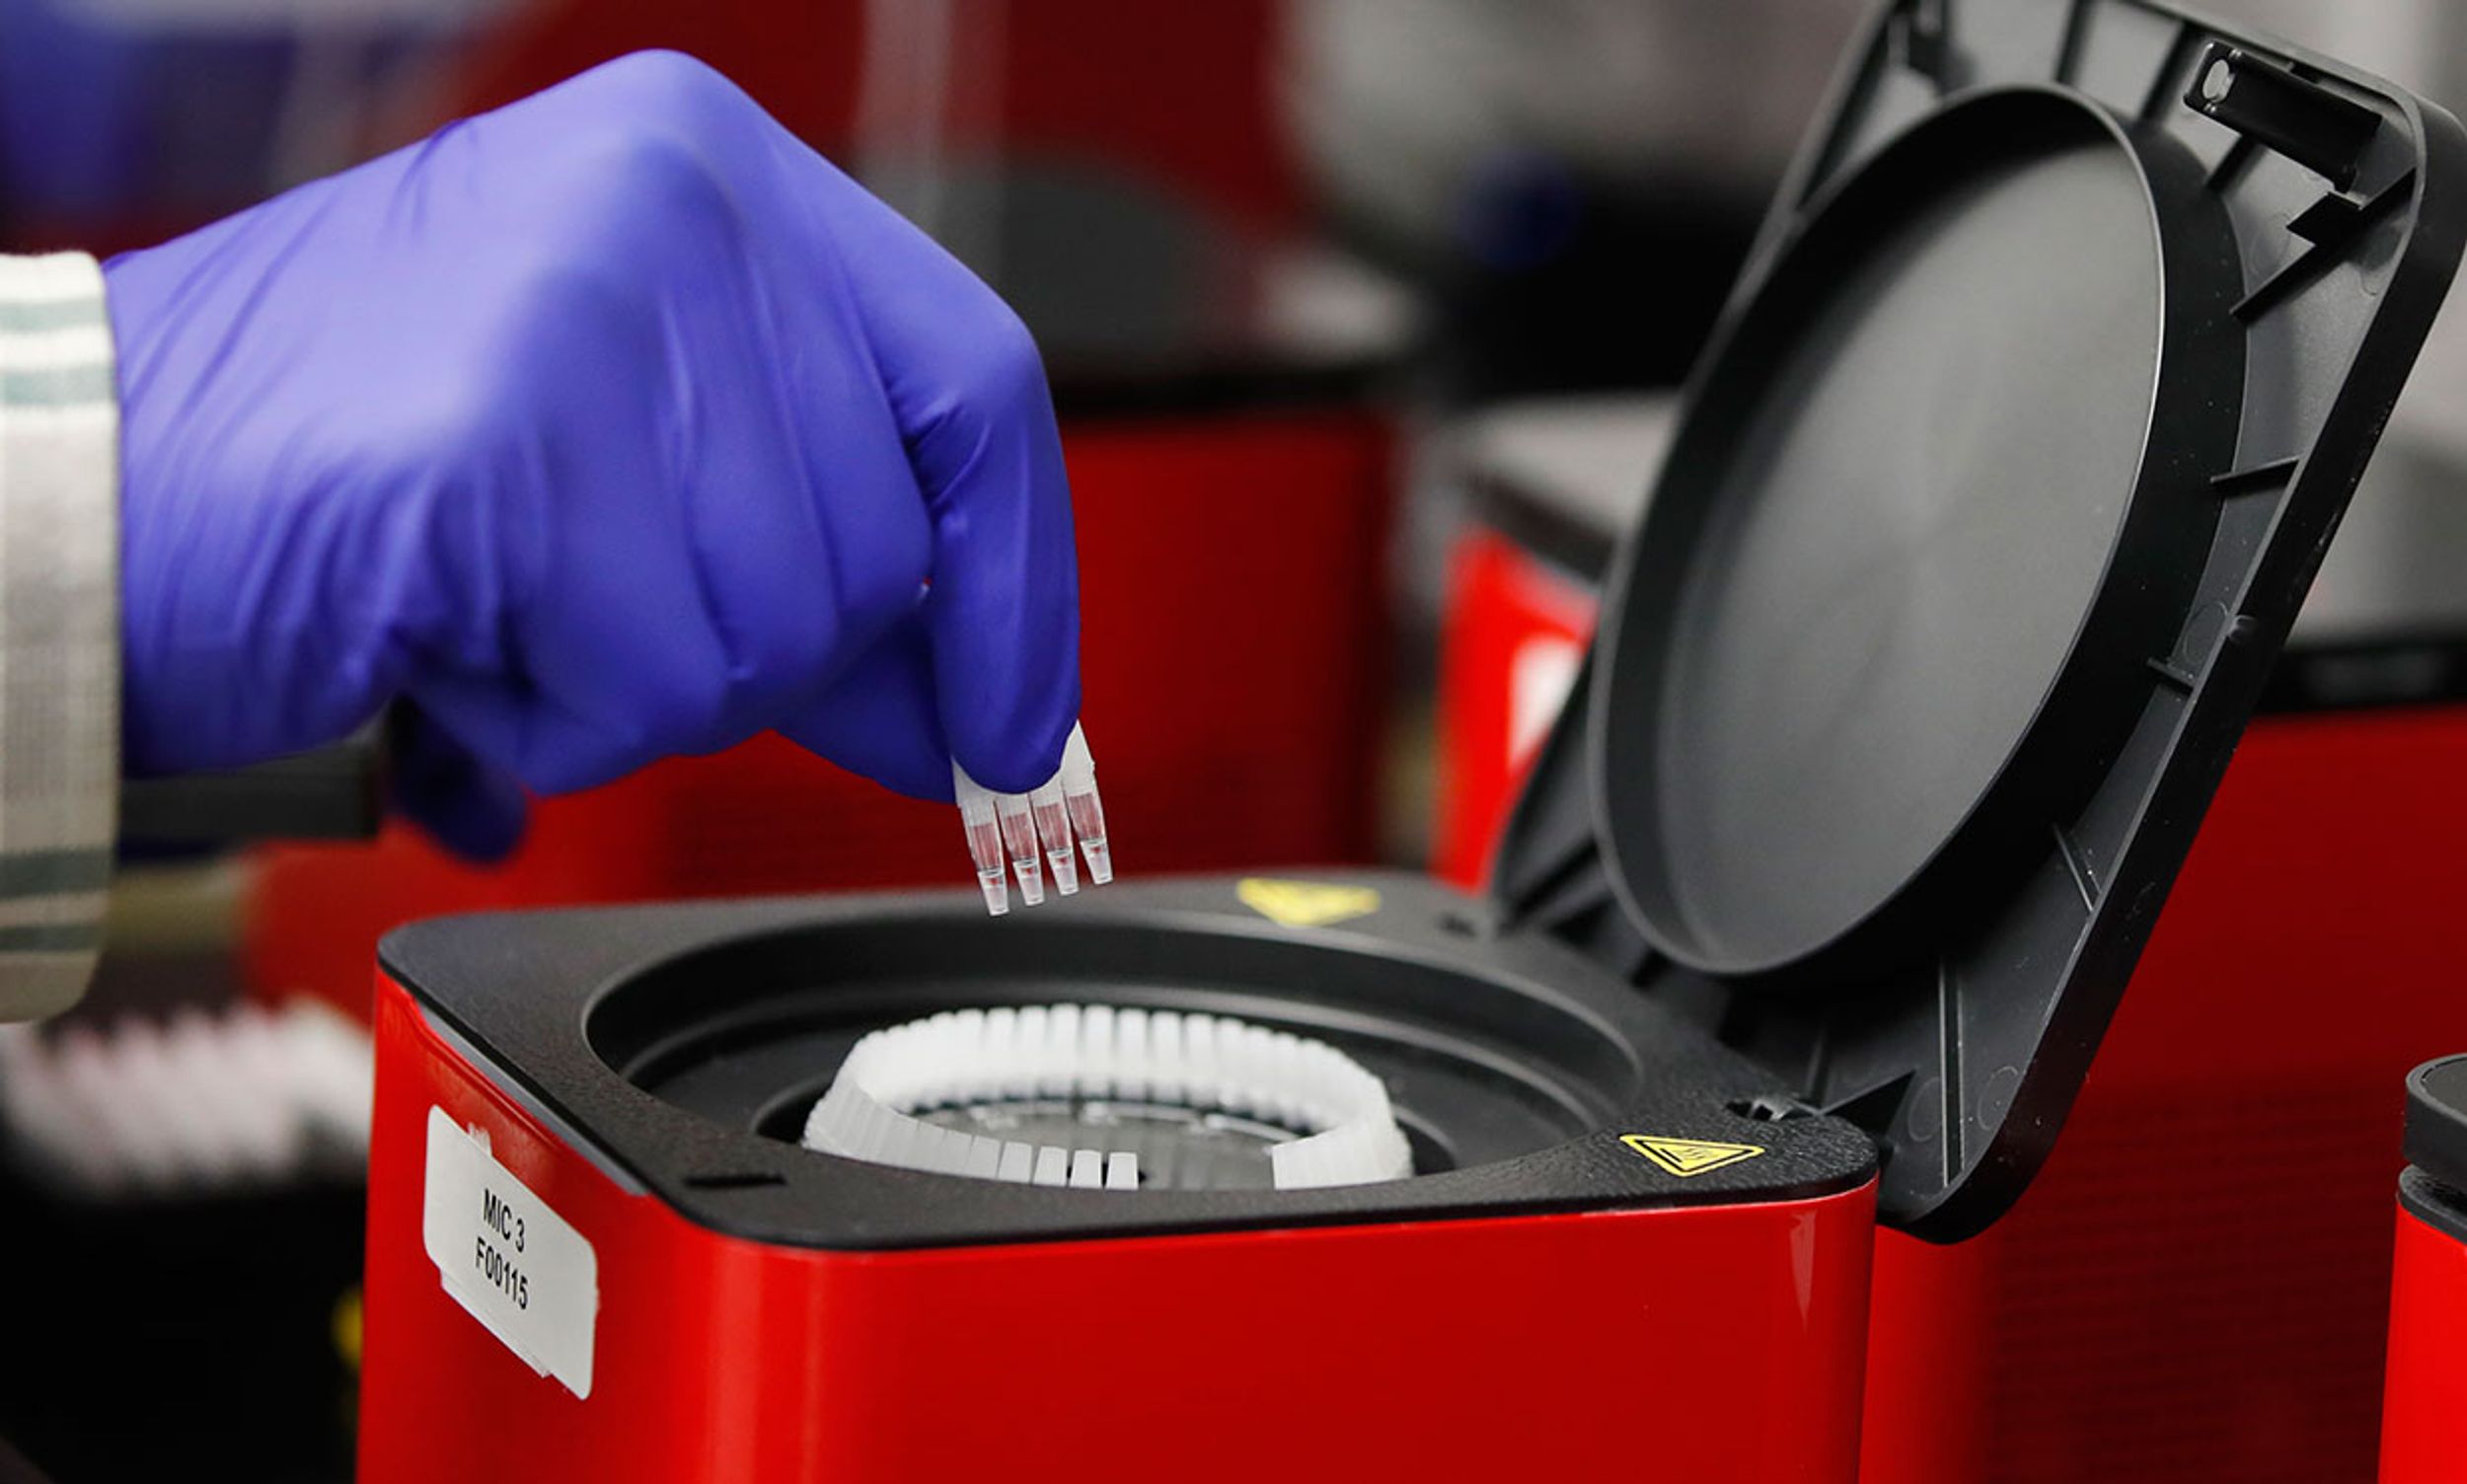 A lab technician adds vials to a Covid-19 polymerase chain reaction (PCR) testing device at a Co-Diagnostics Inc. facility in Salt Lake City, Utah, U.S., on Tuesday, March 24, 2020. 